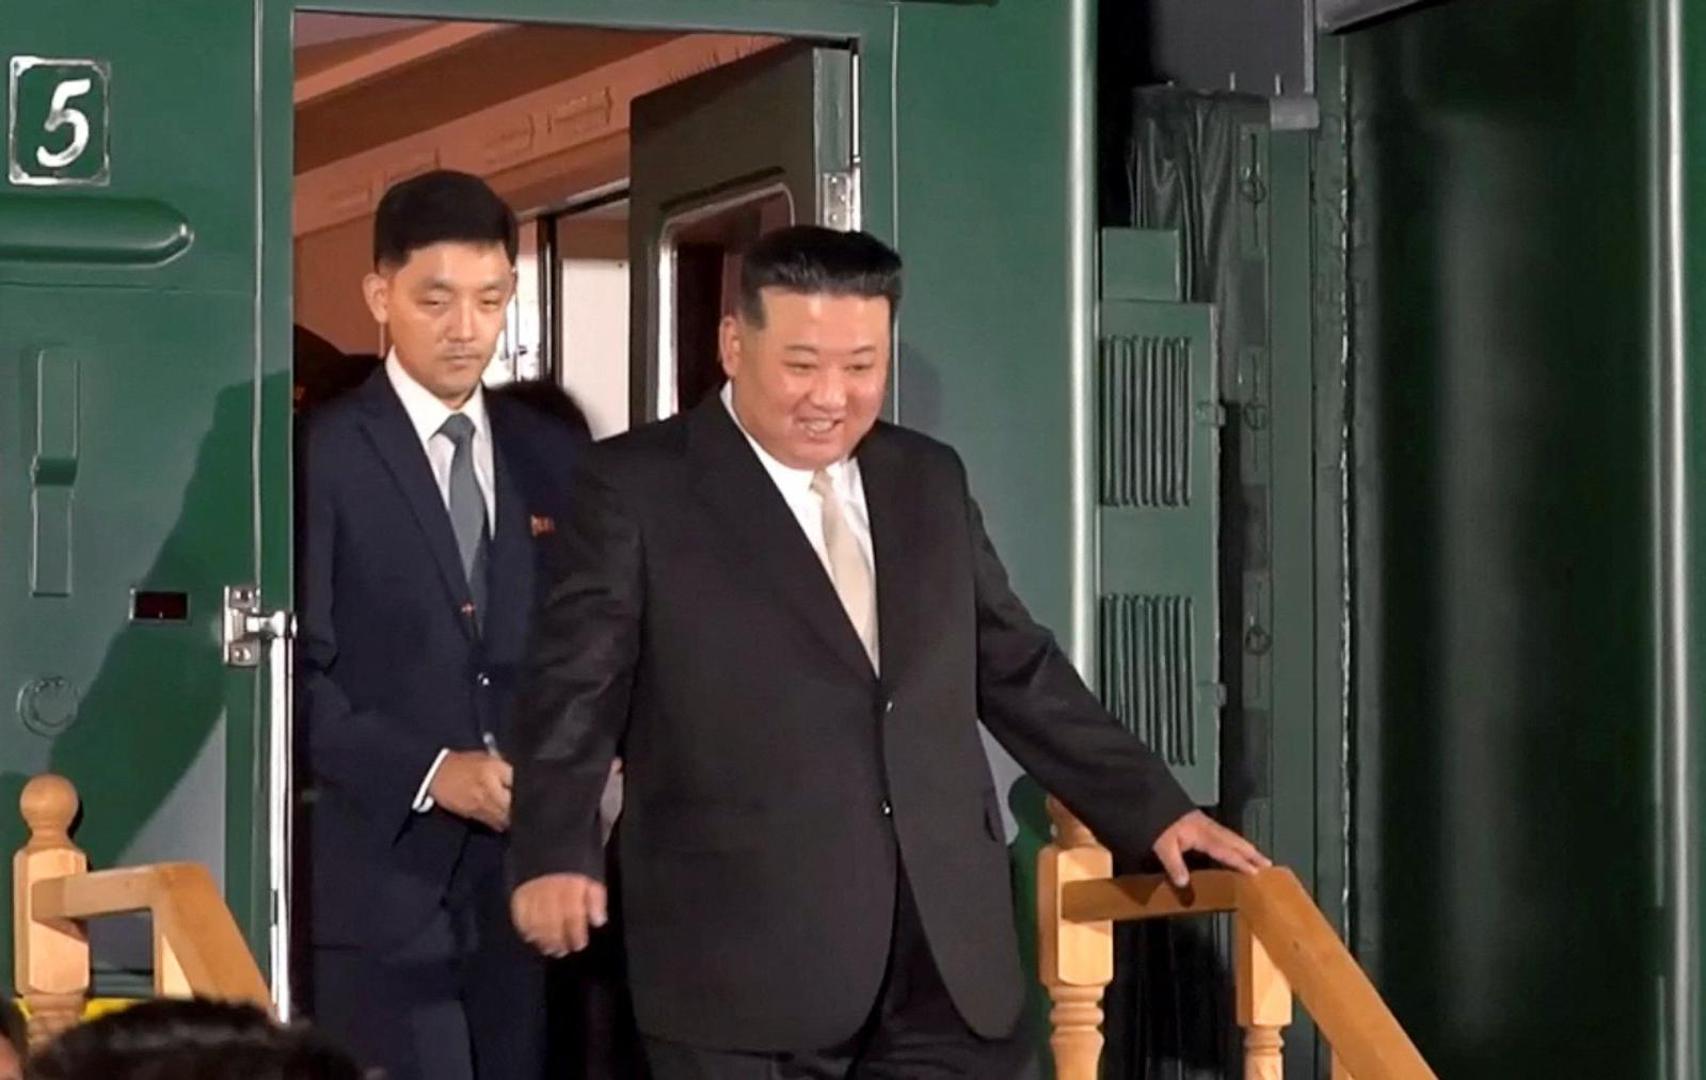 A view shows North Korean leader Kim Jong Un disembarking from his train and being greeted by Russian officials in Khasan in the Primorsky region, Russia, in this still image from video published September 12, 2023. Courtesy Governor of Russia's Primorsky Krai Oleg Kozhemyako Telegram Channel via REUTERS ATTENTION EDITORS - THIS IMAGE WAS PROVIDED BY A THIRD PARTY. NO RESALES. NO ARCHIVES. MANDATORY CREDIT. THIS PICTURE WAS PROCESSED BY REUTERS TO ENHANCE QUALITY. AN UNPROCESSED VERSION HAS BEEN PROVIDED SEPARATELY. Photo: OLEG KOZHEMYAKO TELEGRAM CHANNEL/REUTERS